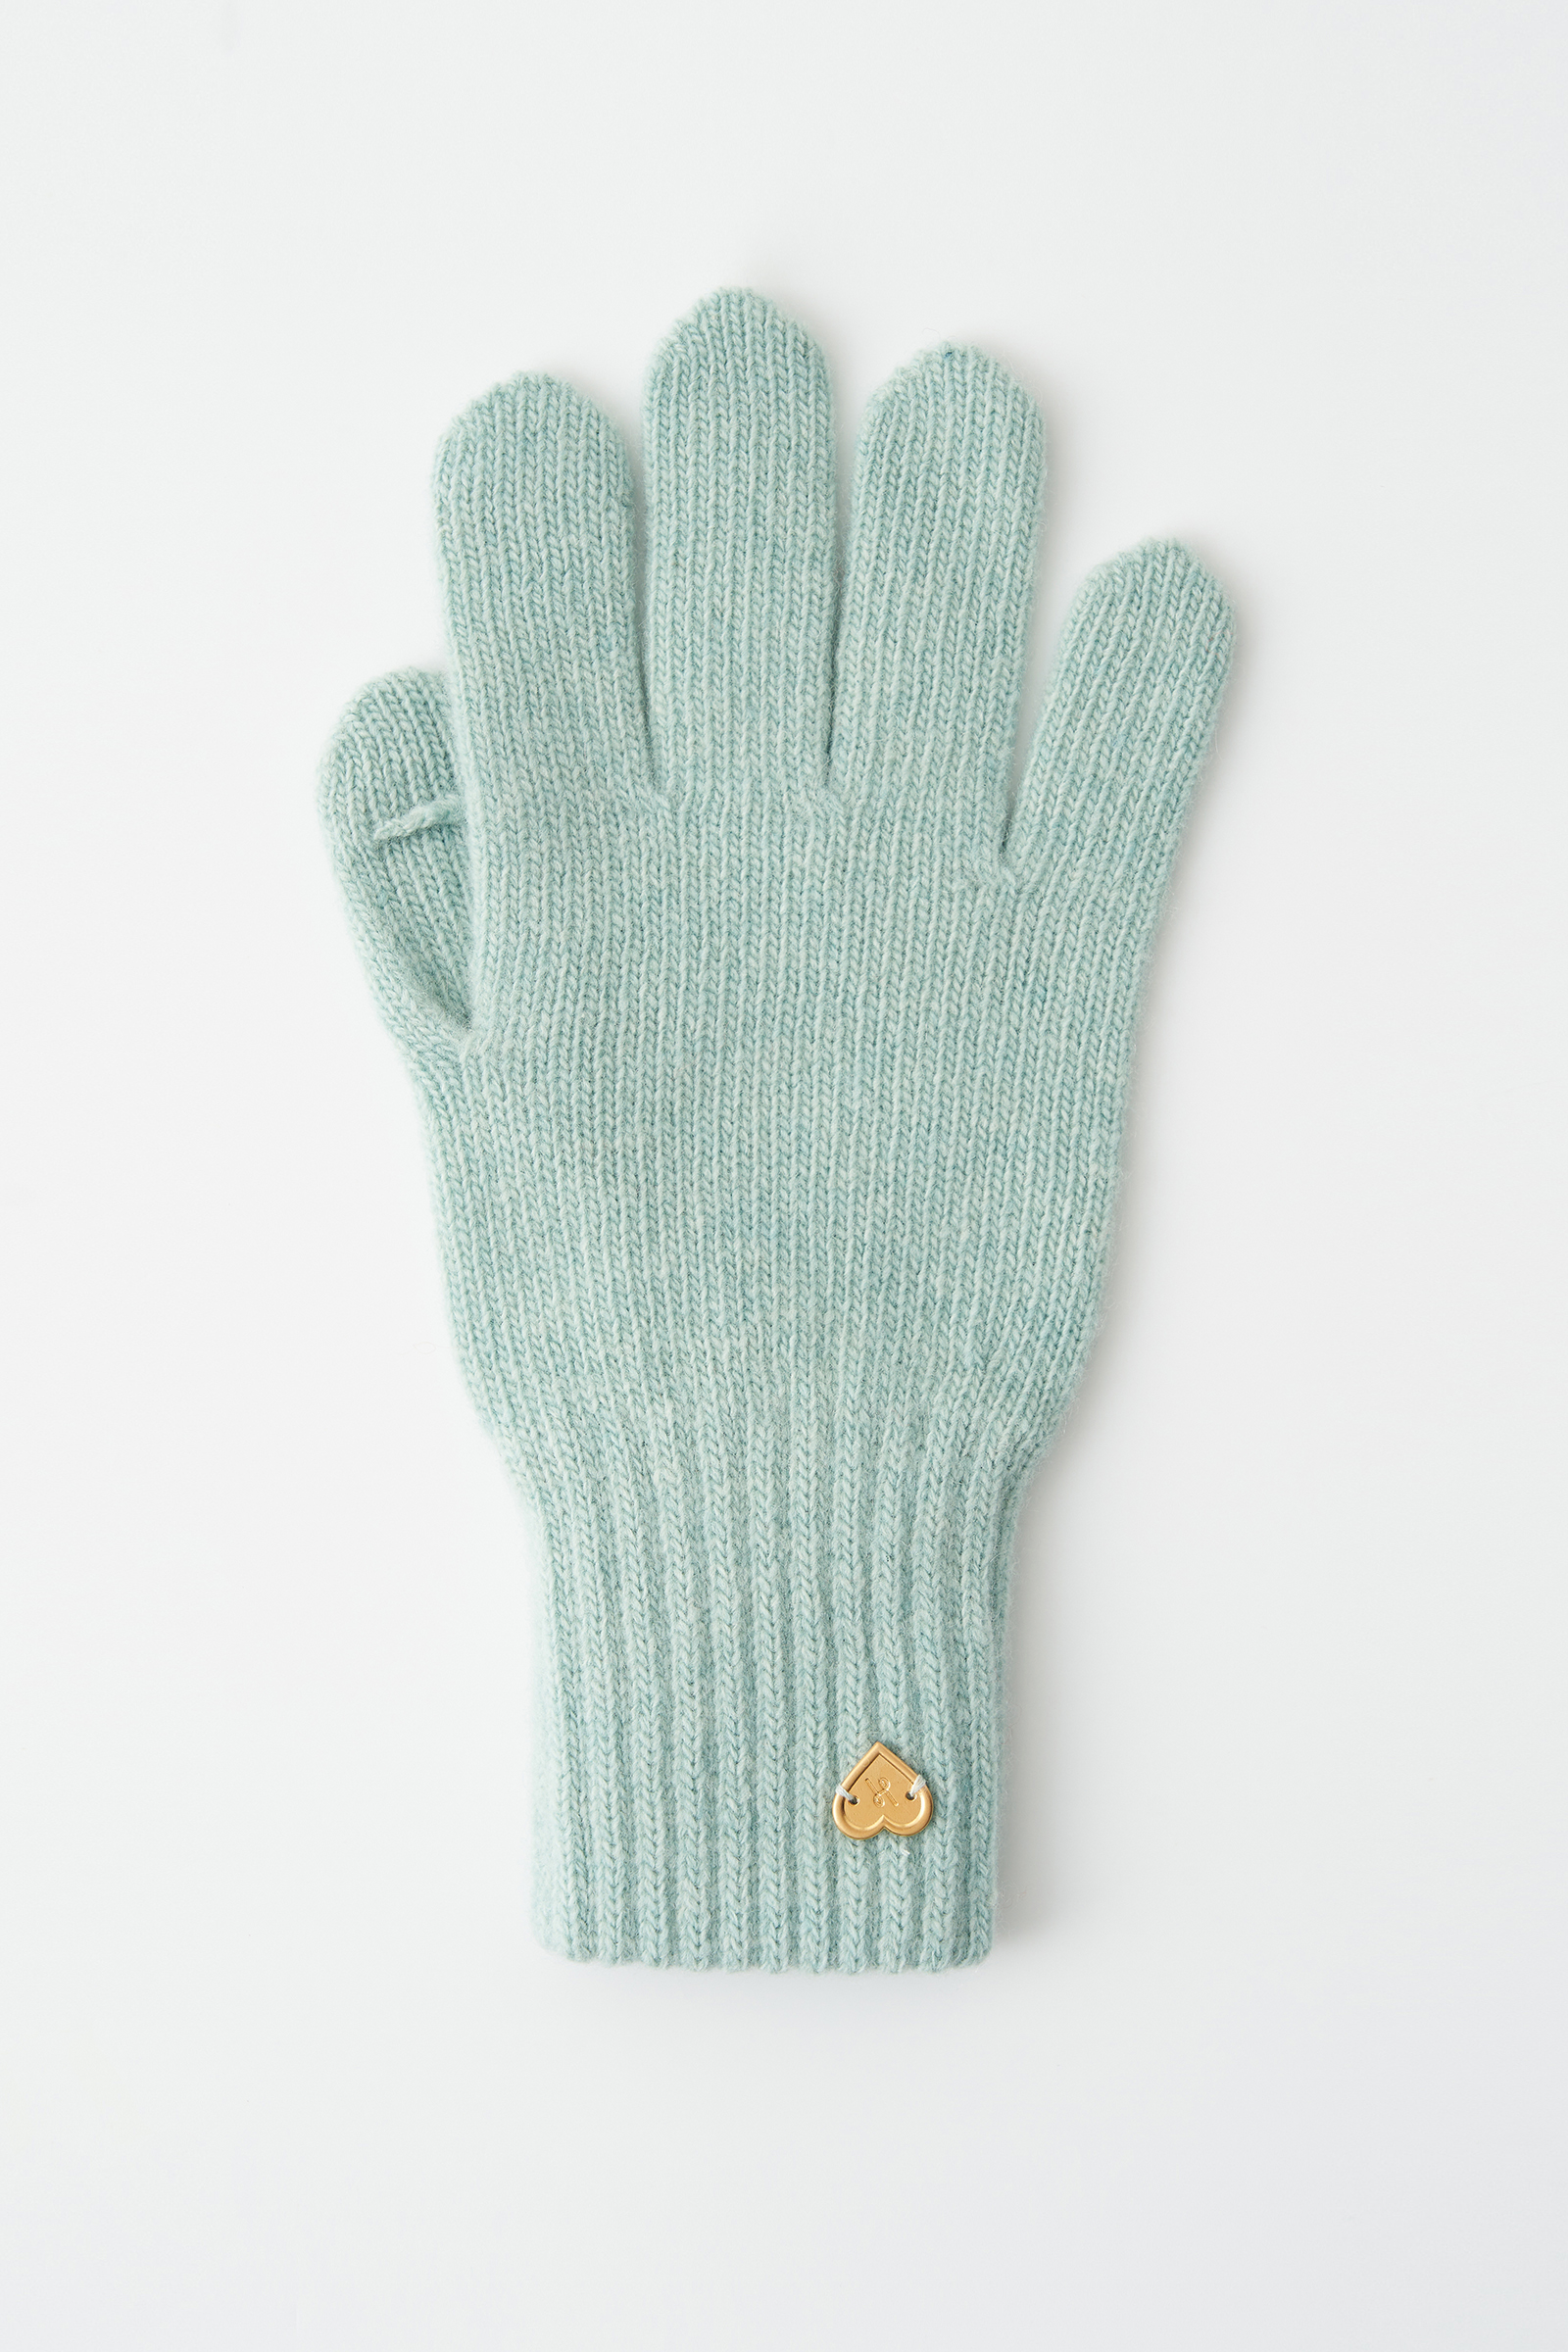 [4th] Day Knit Gloves